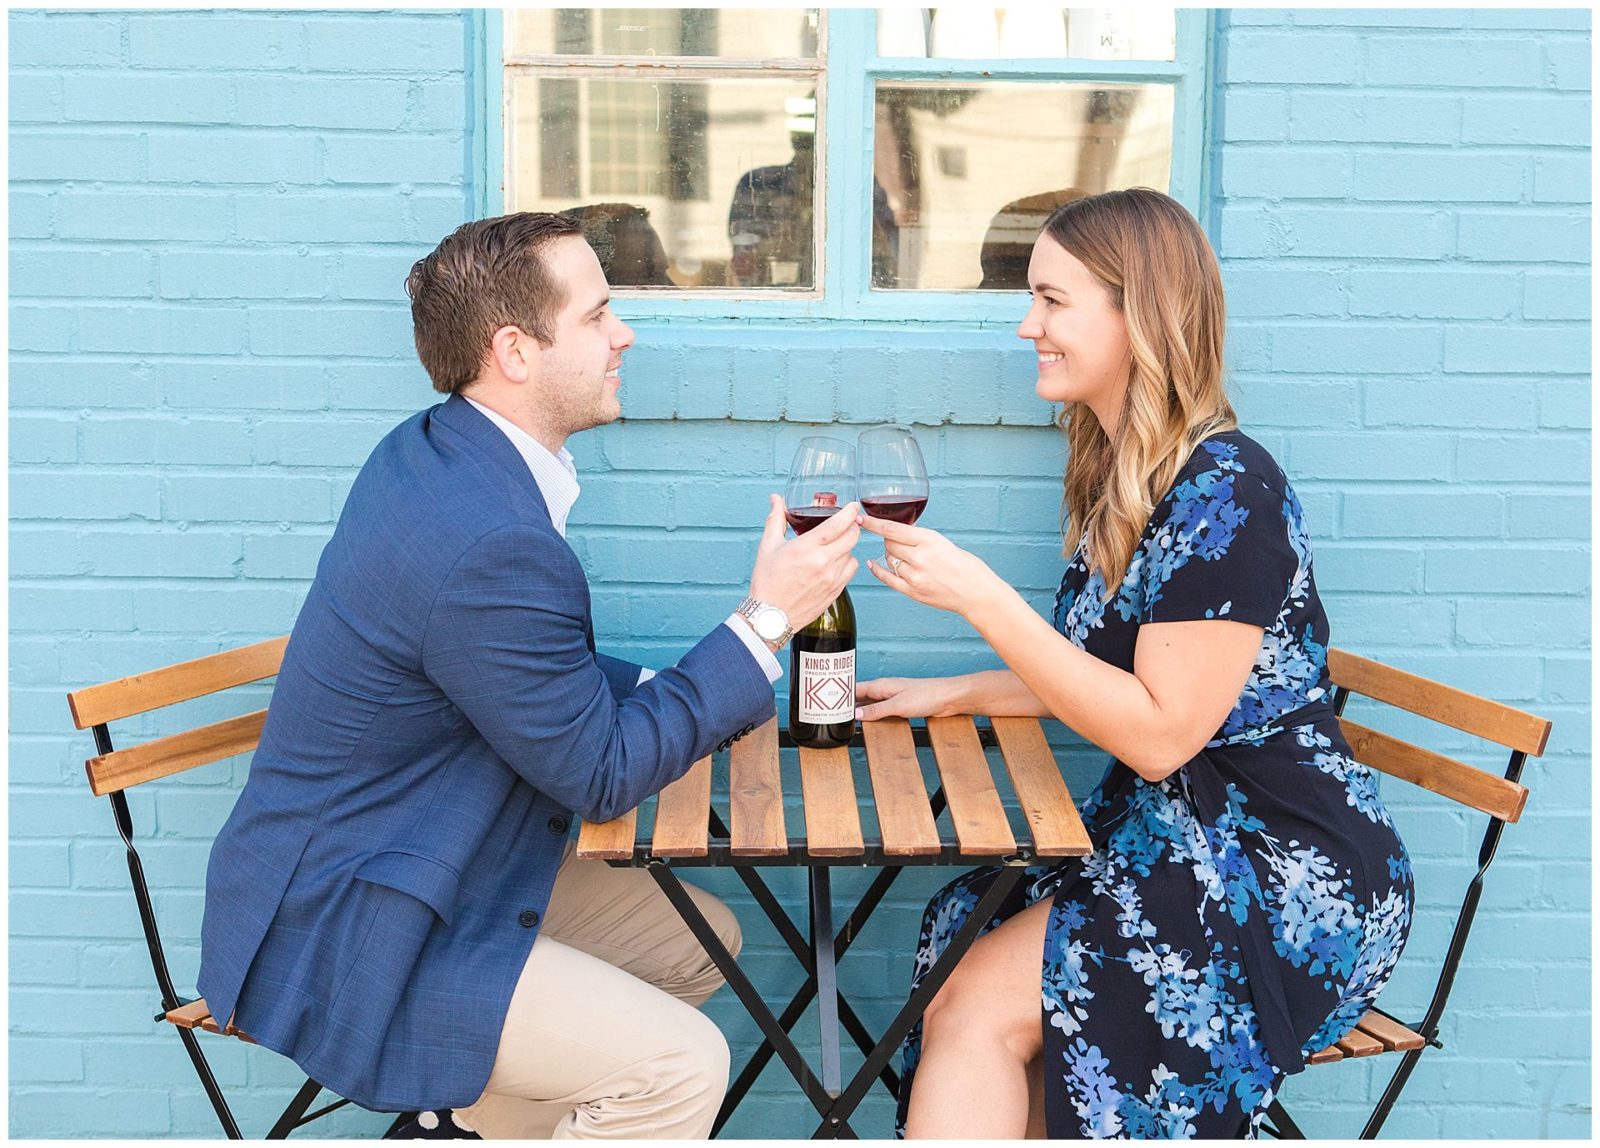 Engagement session at a cute little wine boutique called Mine + Market in Lexington, KY